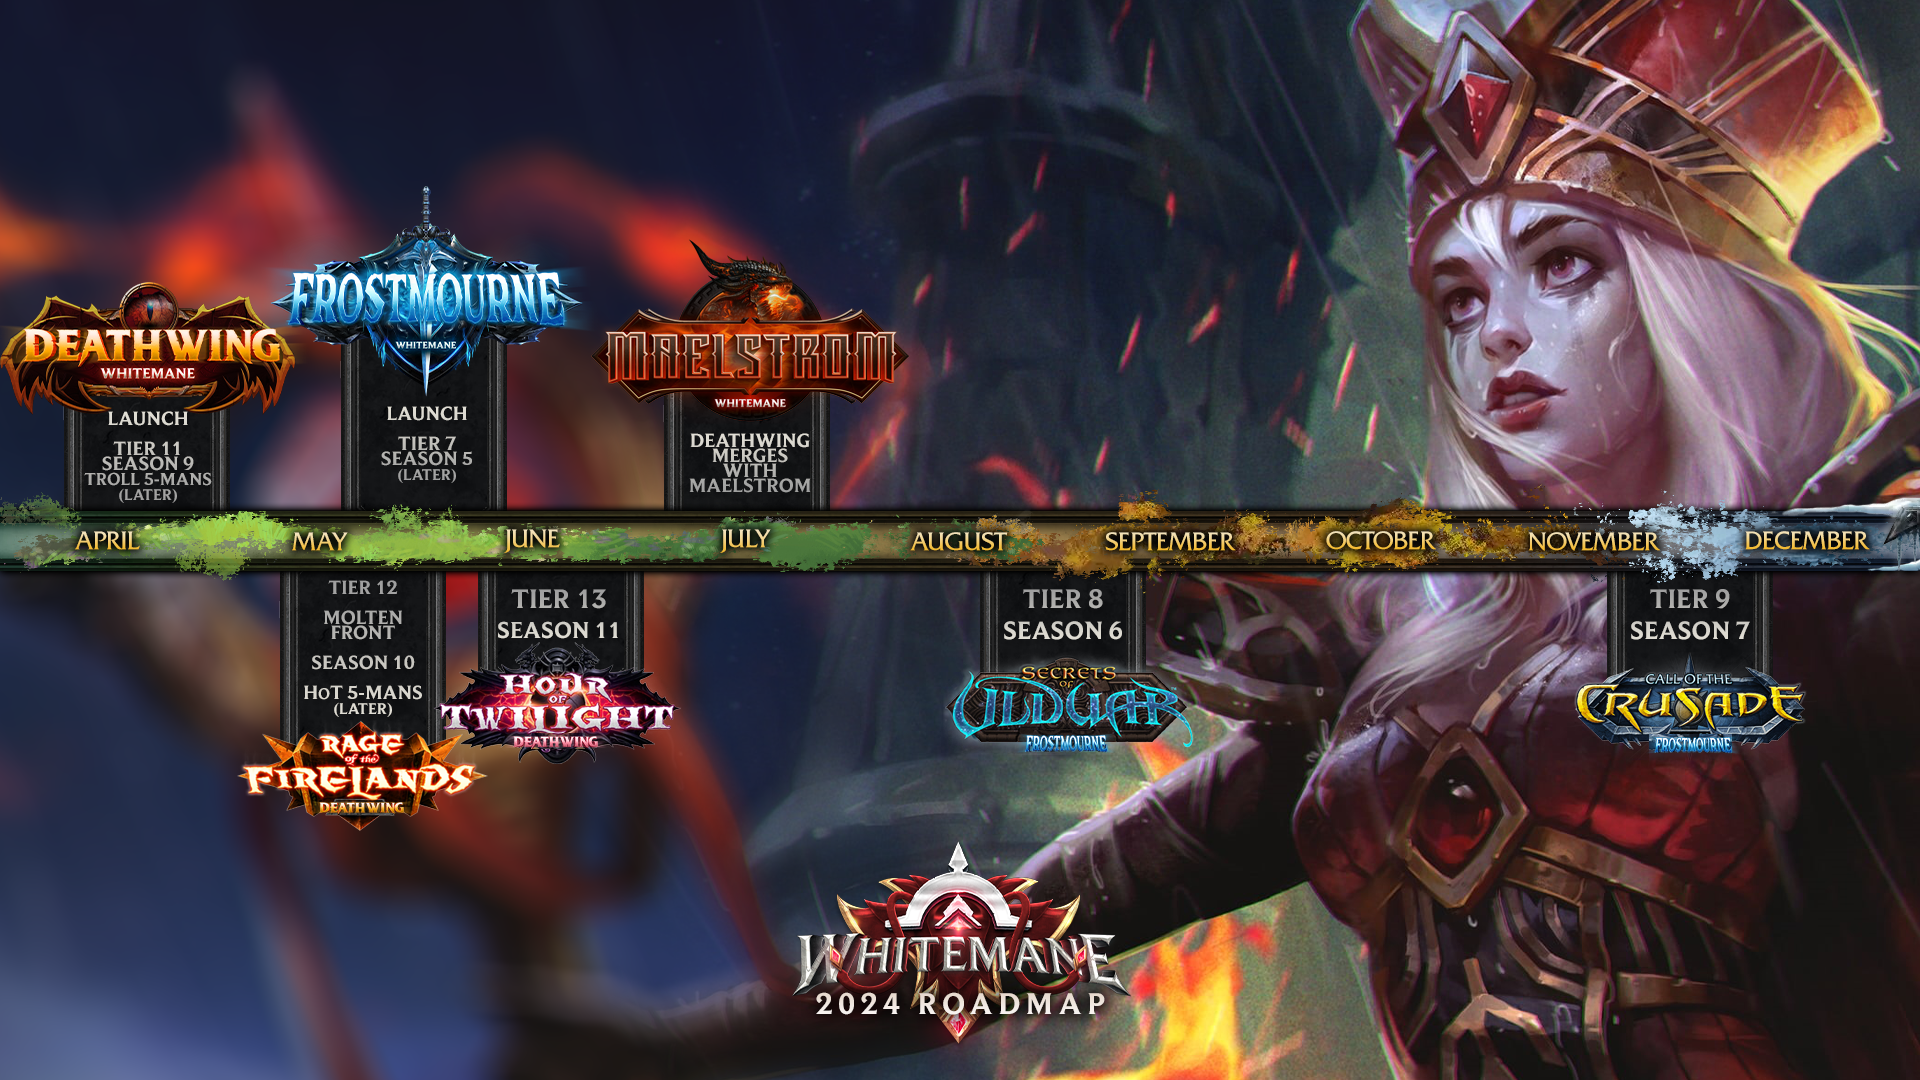 Whitemane: 2024 Roadmap, Deathwing, and Frostmourne